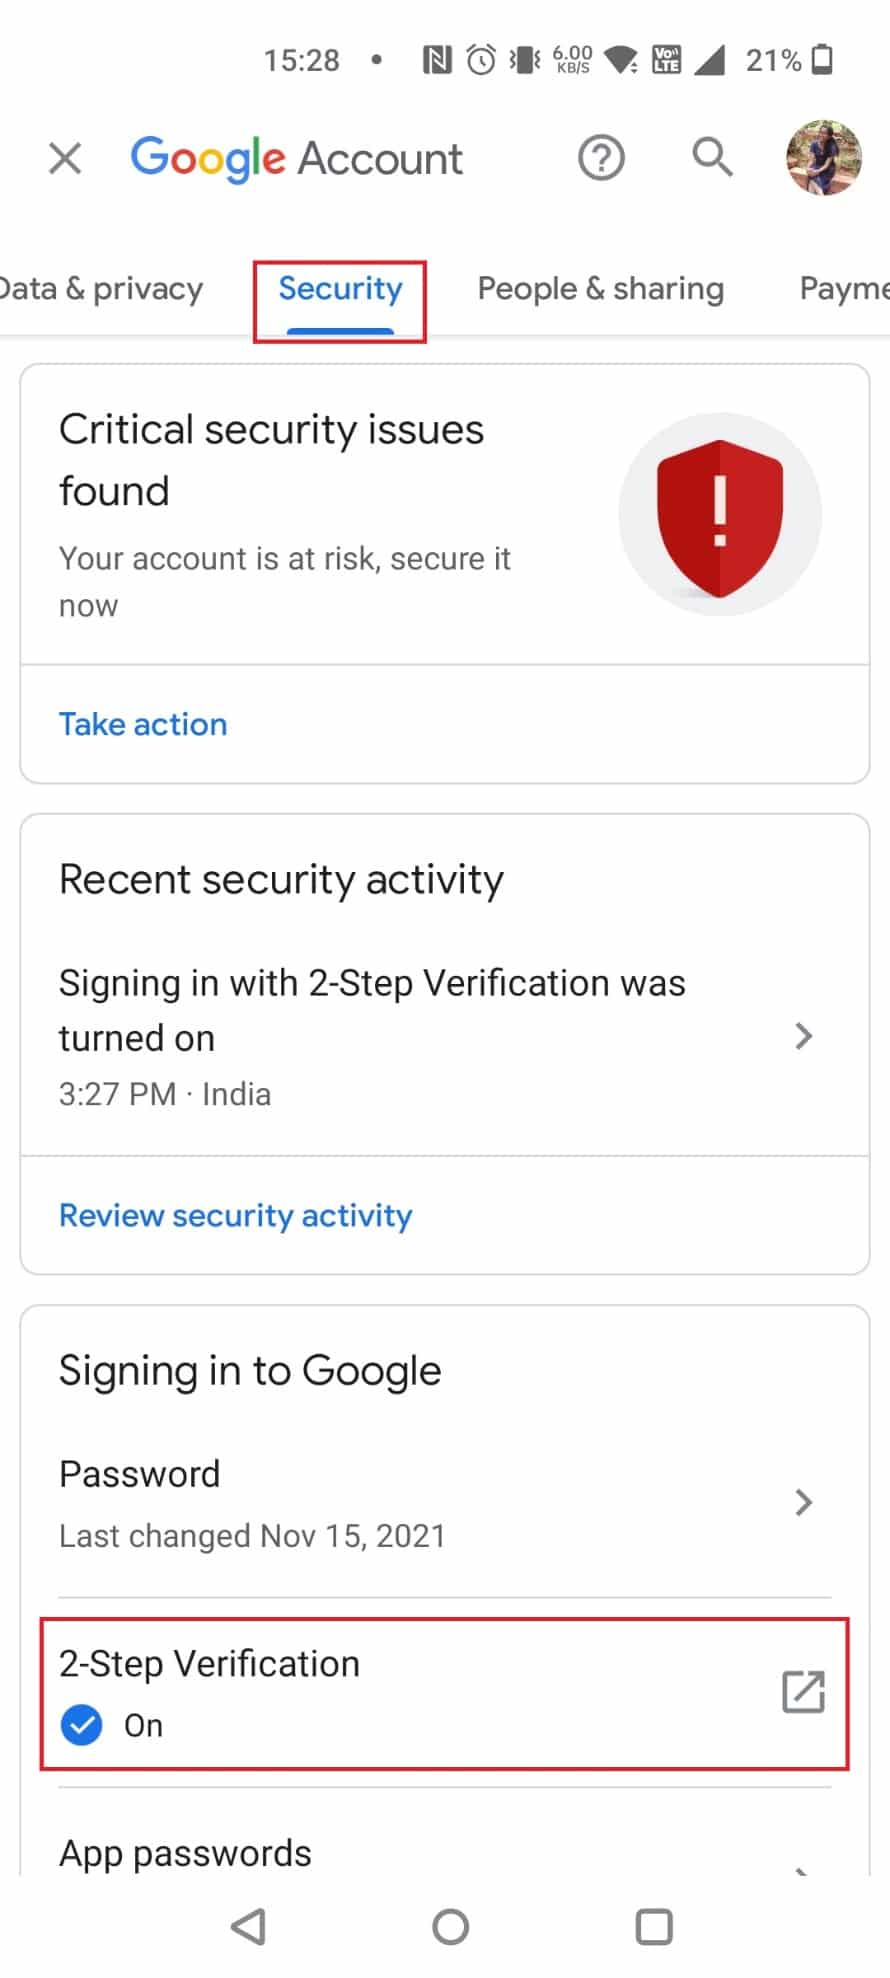 Tap on 2-Step Verification under Signing in to Google | 8 digit backup code for Gmail